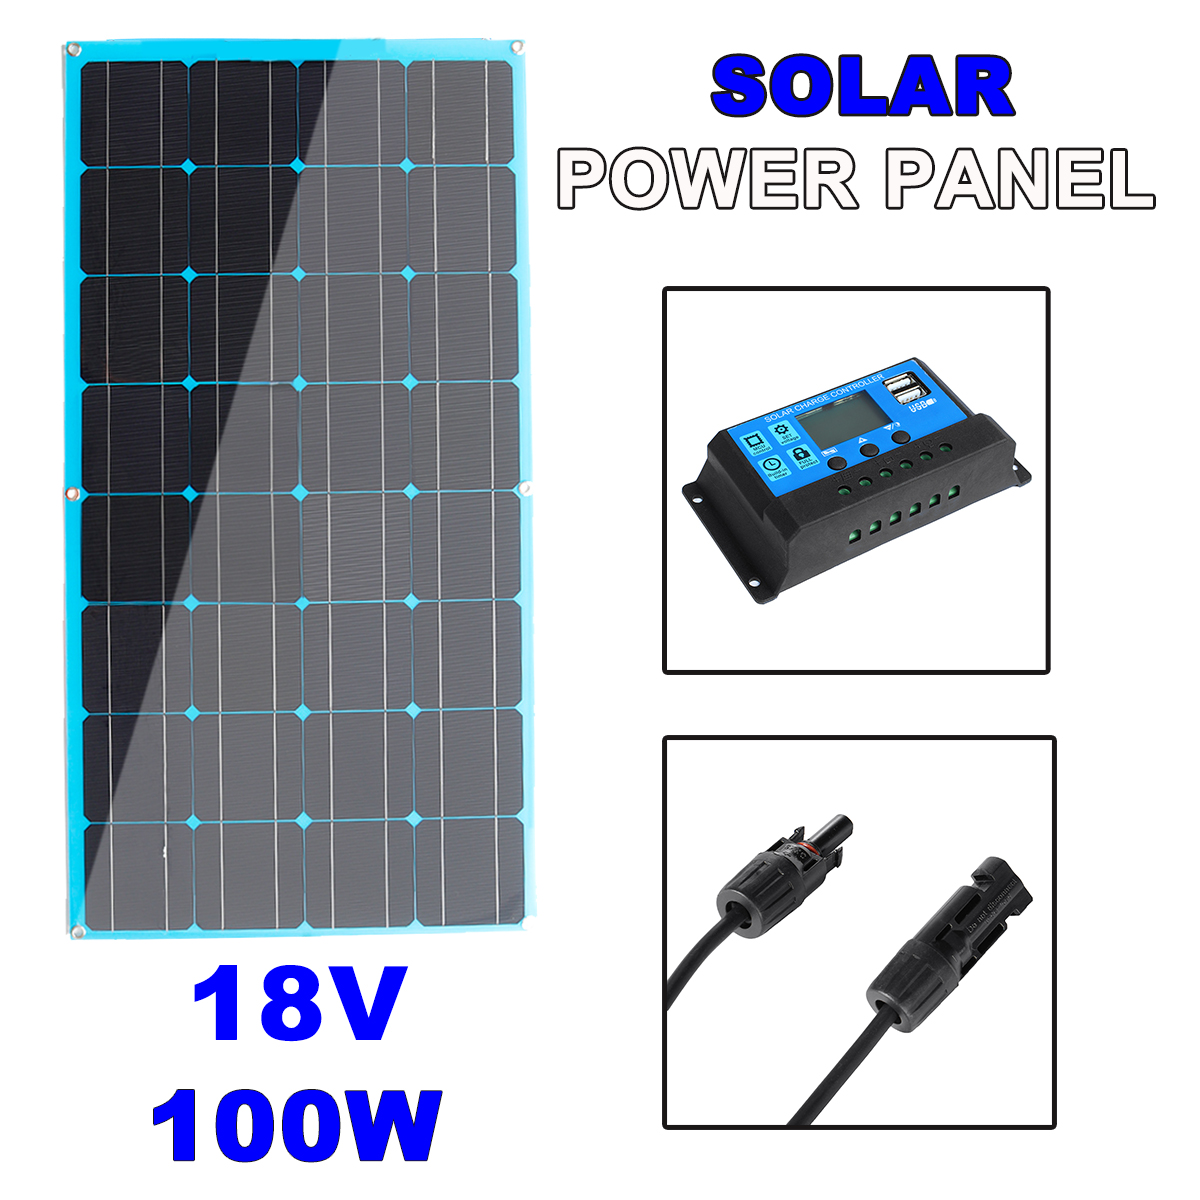 100W-18V-Polycrystalline-Solar-Panel-USBDC-Dual-Output-Battery-Charger-Portable-Camping-Travel-1856138-3